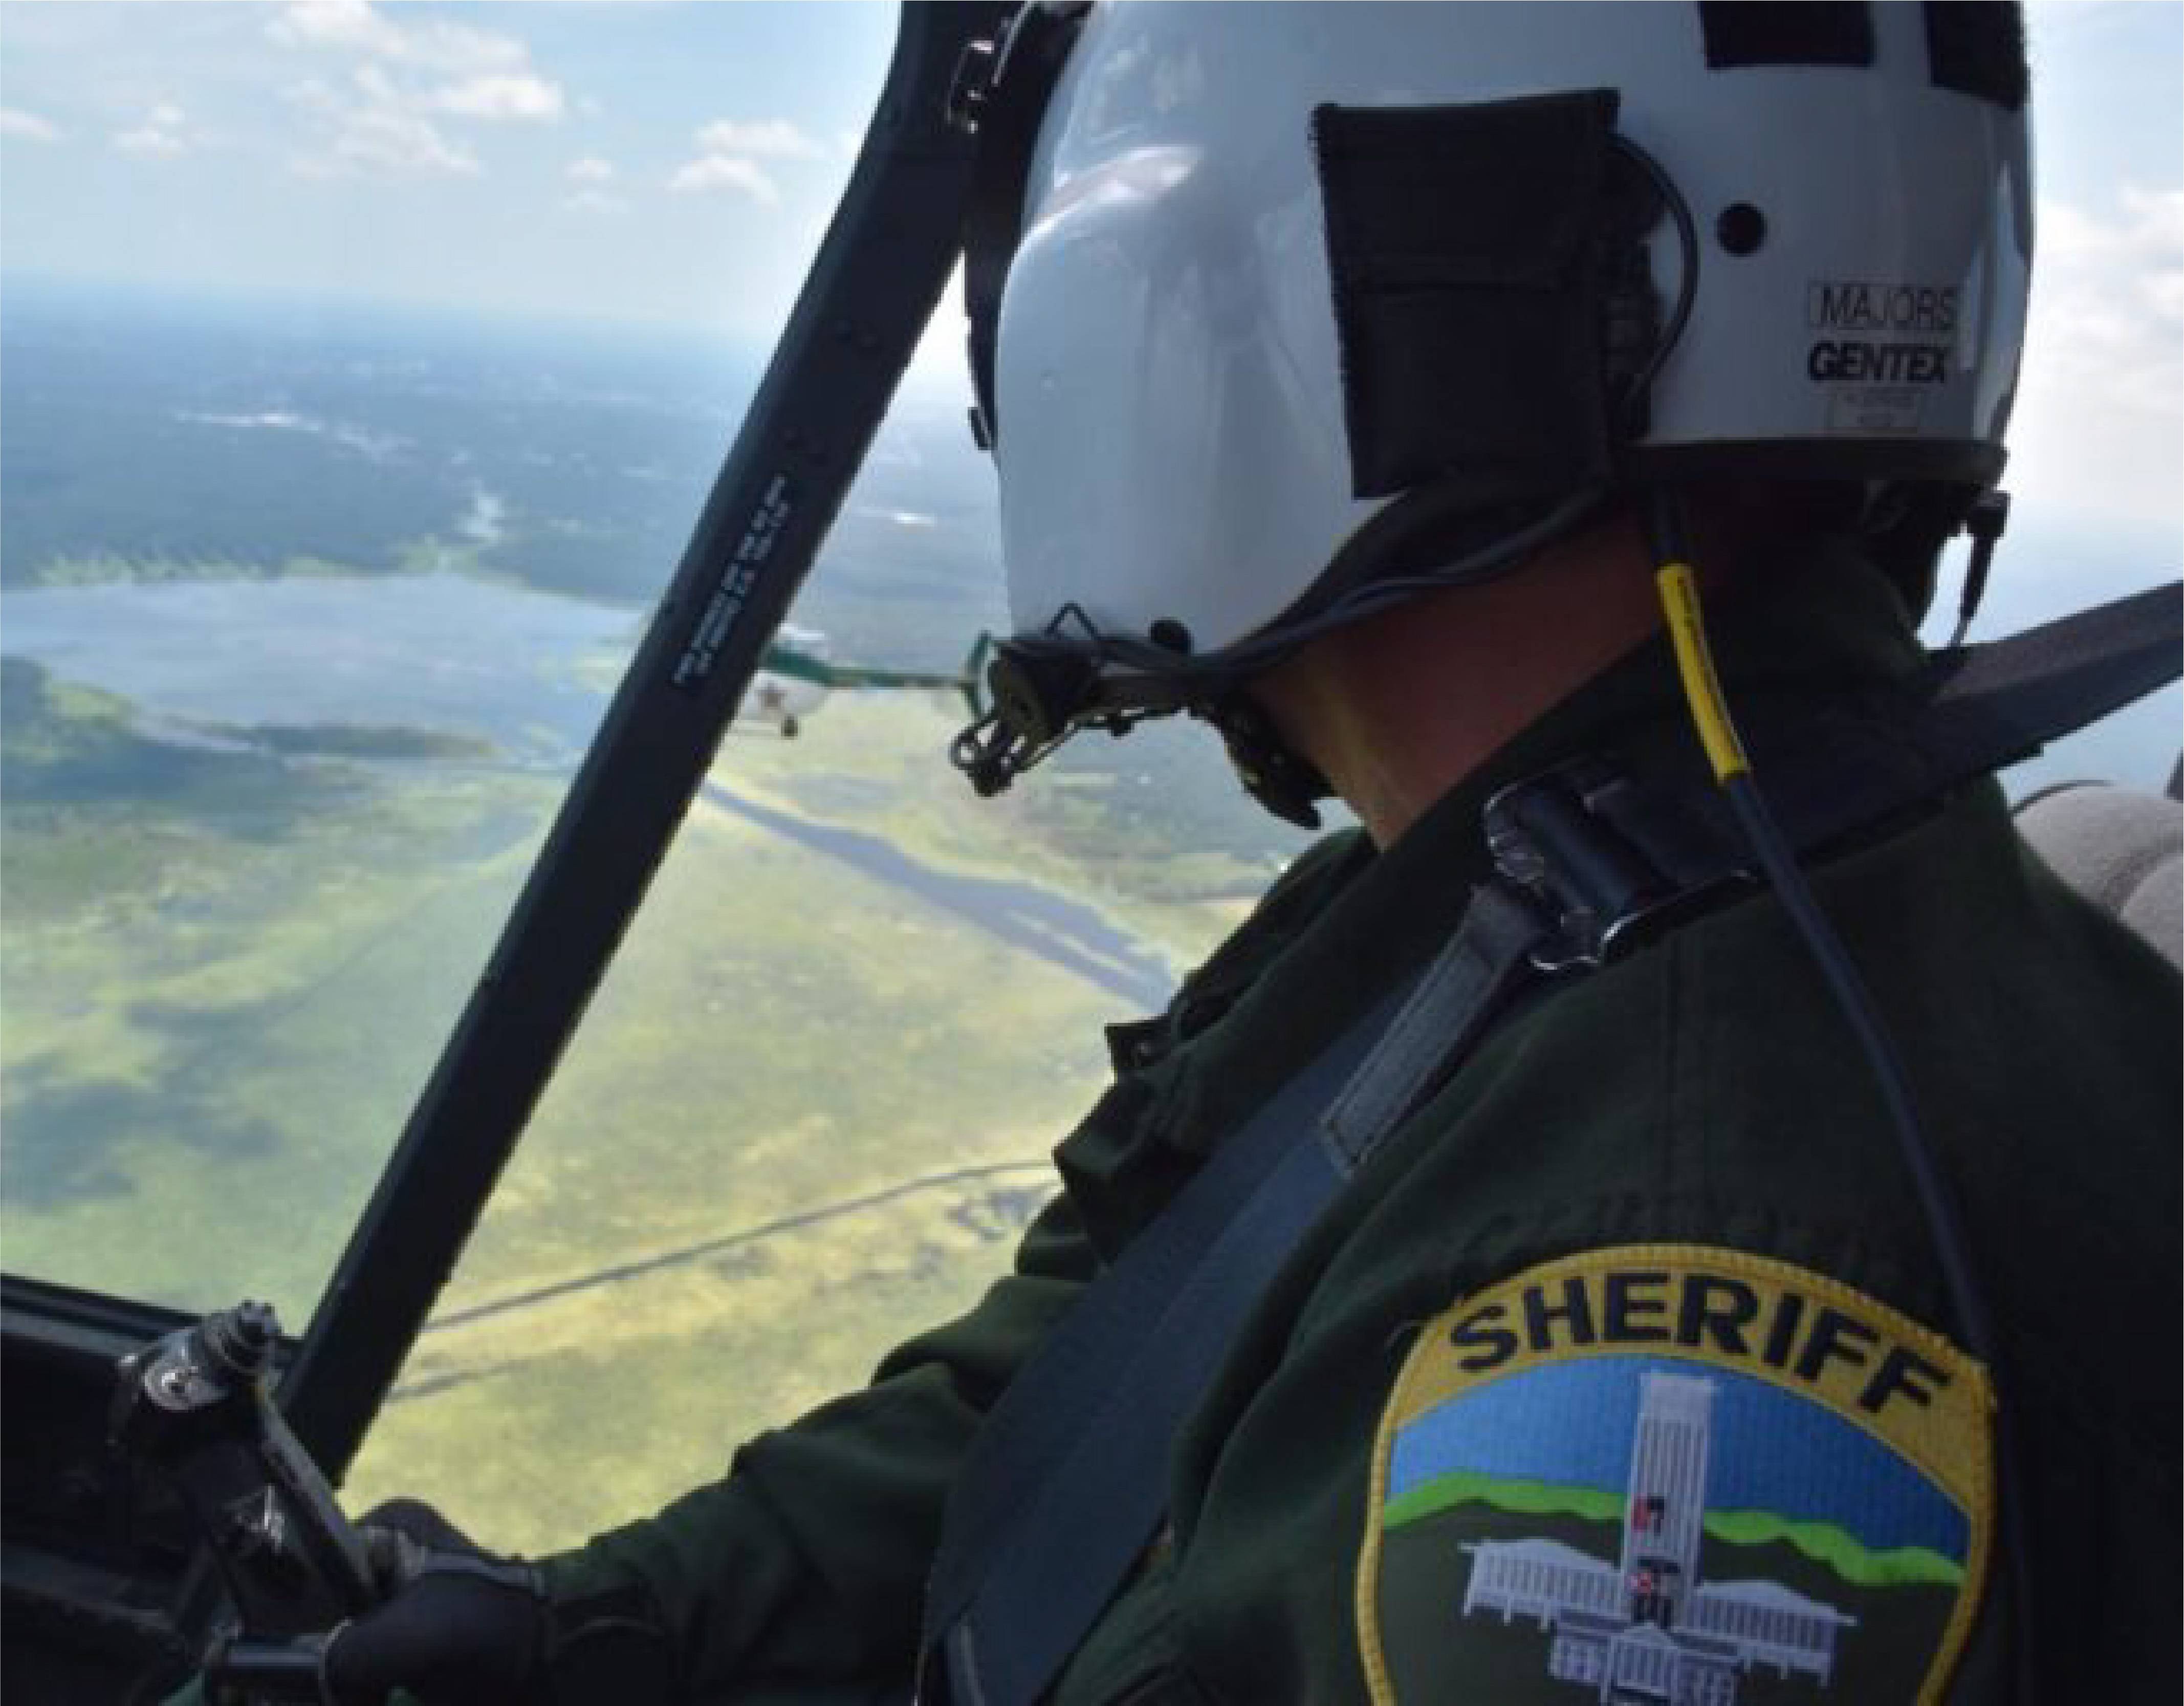 Leon County Sheriff’s Office performs law enforcement, search-and-rescue, and other critical functions in the panhandle of Florida including the state capital of Tallahassee. Leon County Sheriff’s Office Photo